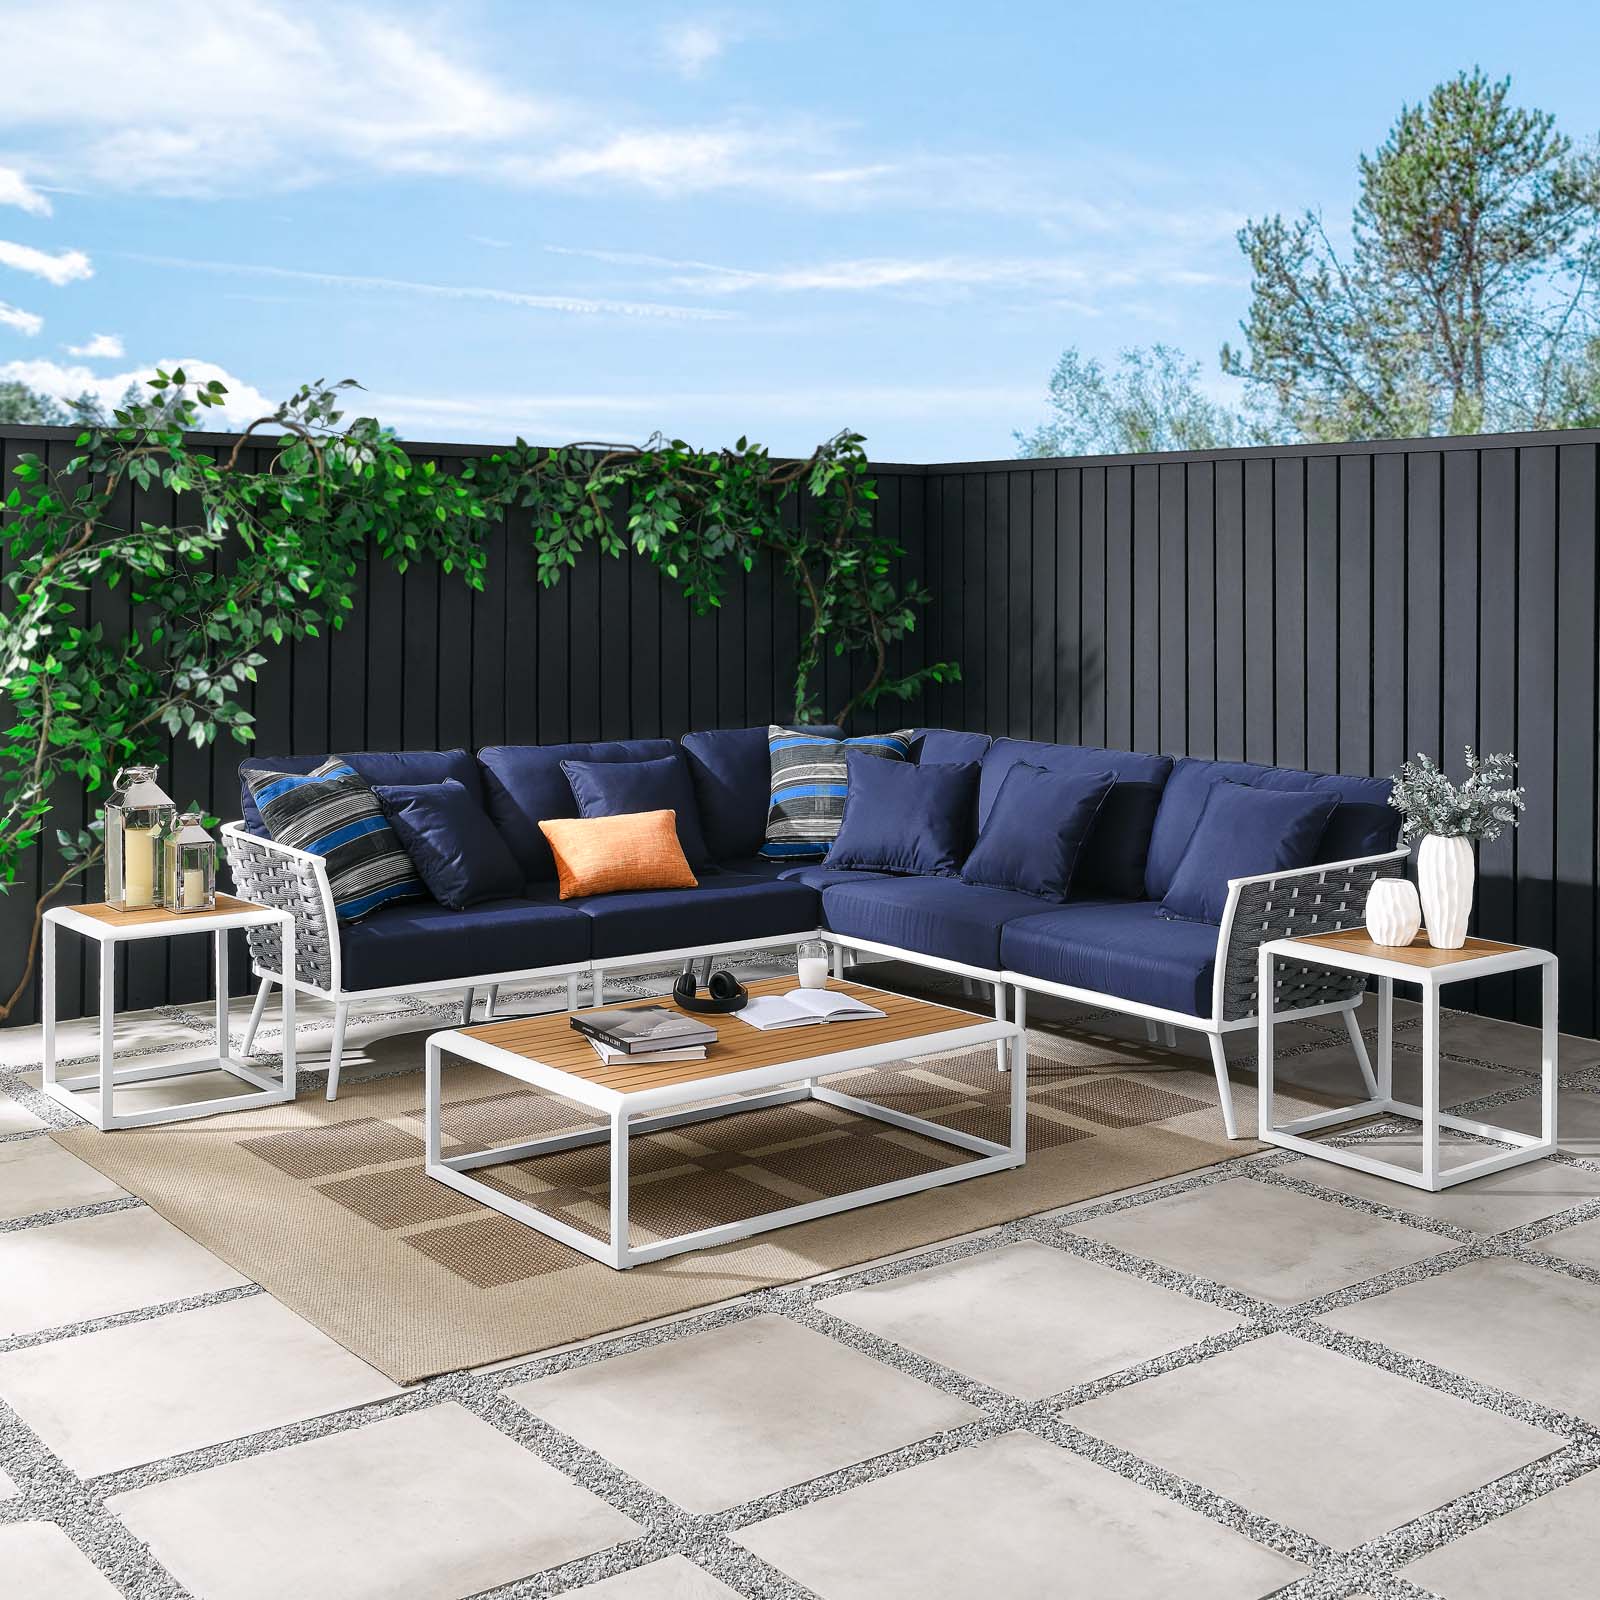 Lounge Sectional Sofa Chair Table Set, Navy White, Aluminum, Metal, Fabric, Modern Contemporary, Outdoor Patio Balcony Cafe Bistro Garden Furniture Hotel Hospitality - image 2 of 10